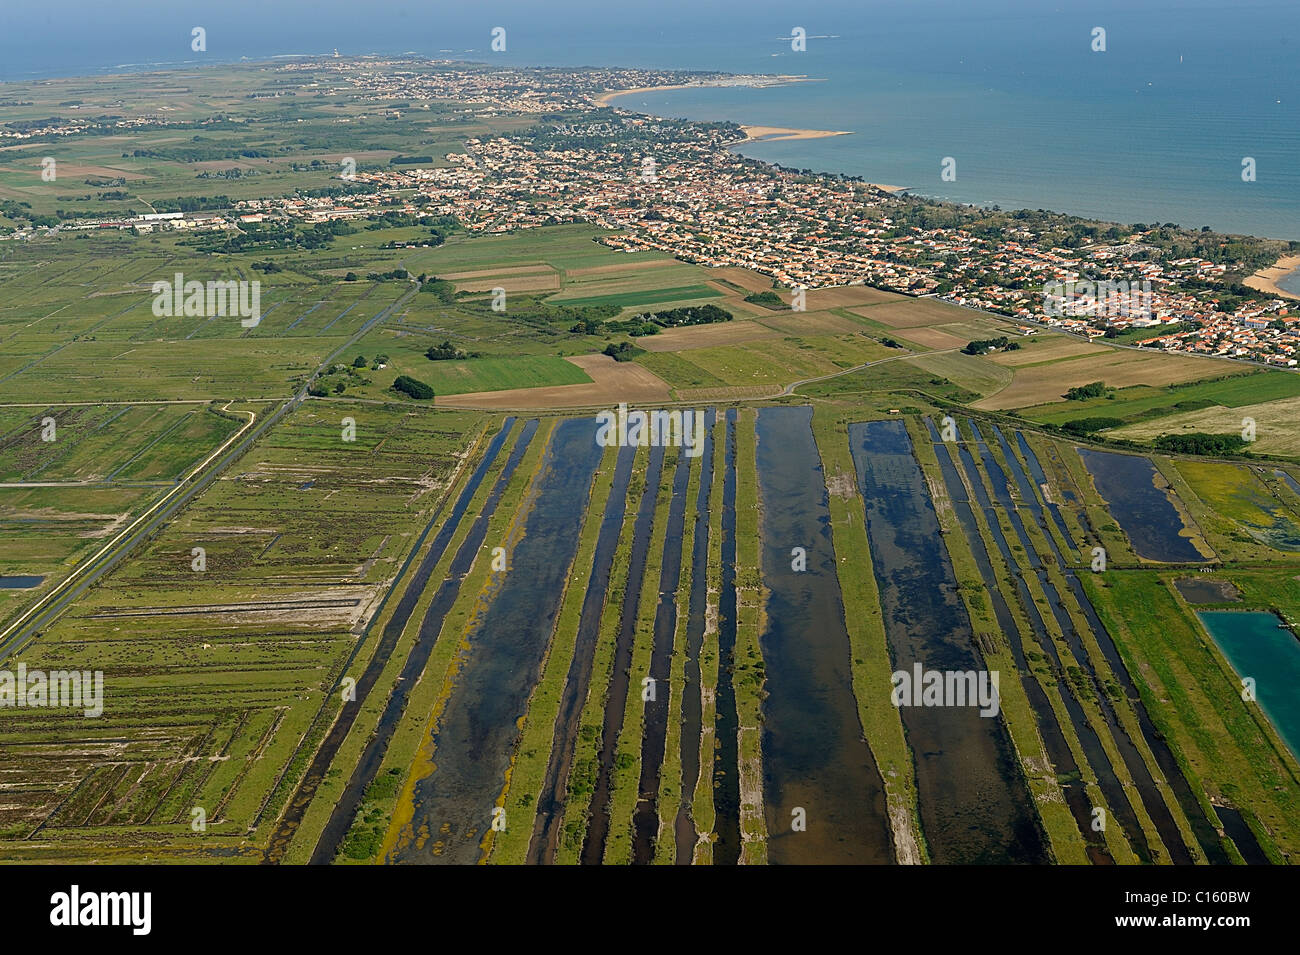 Aerial view of les claires between marsh and oyster bed on the east coast of Oleron island, Charente Maritime department, France Stock Photo